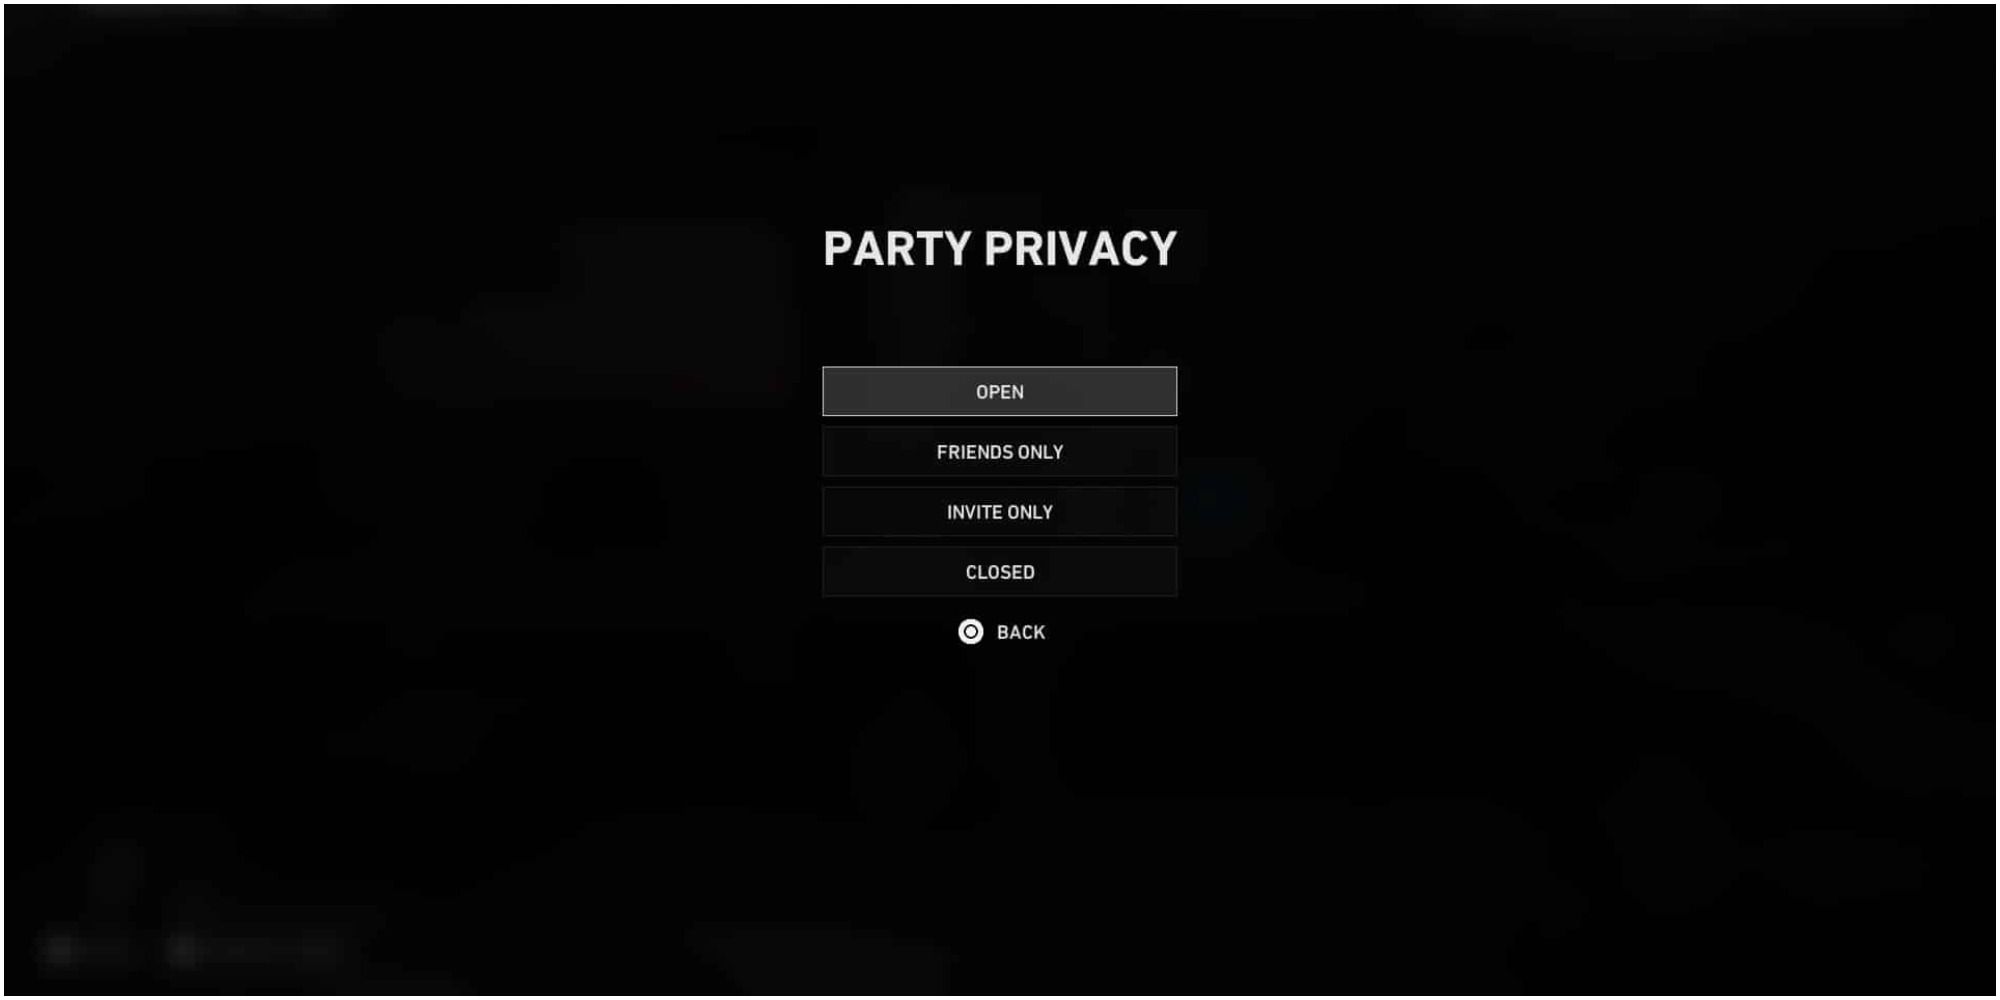 Back4Blood Party Privacy options screen